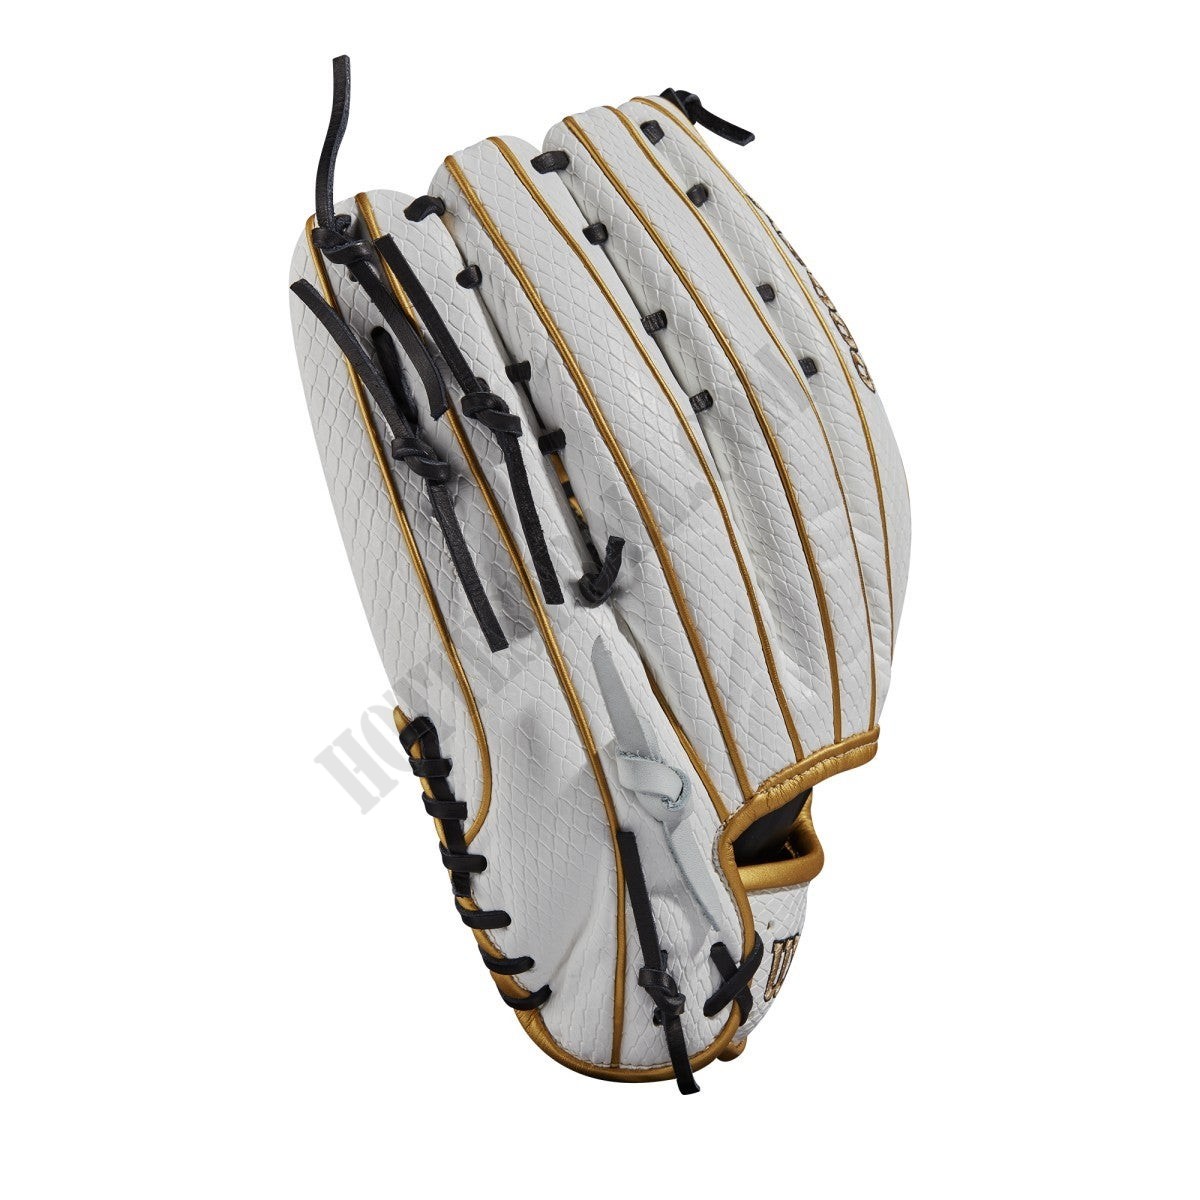 2021 A2000 OT7SS Six String 12.75" Outfield Baseball Glove ● Wilson Promotions - -4